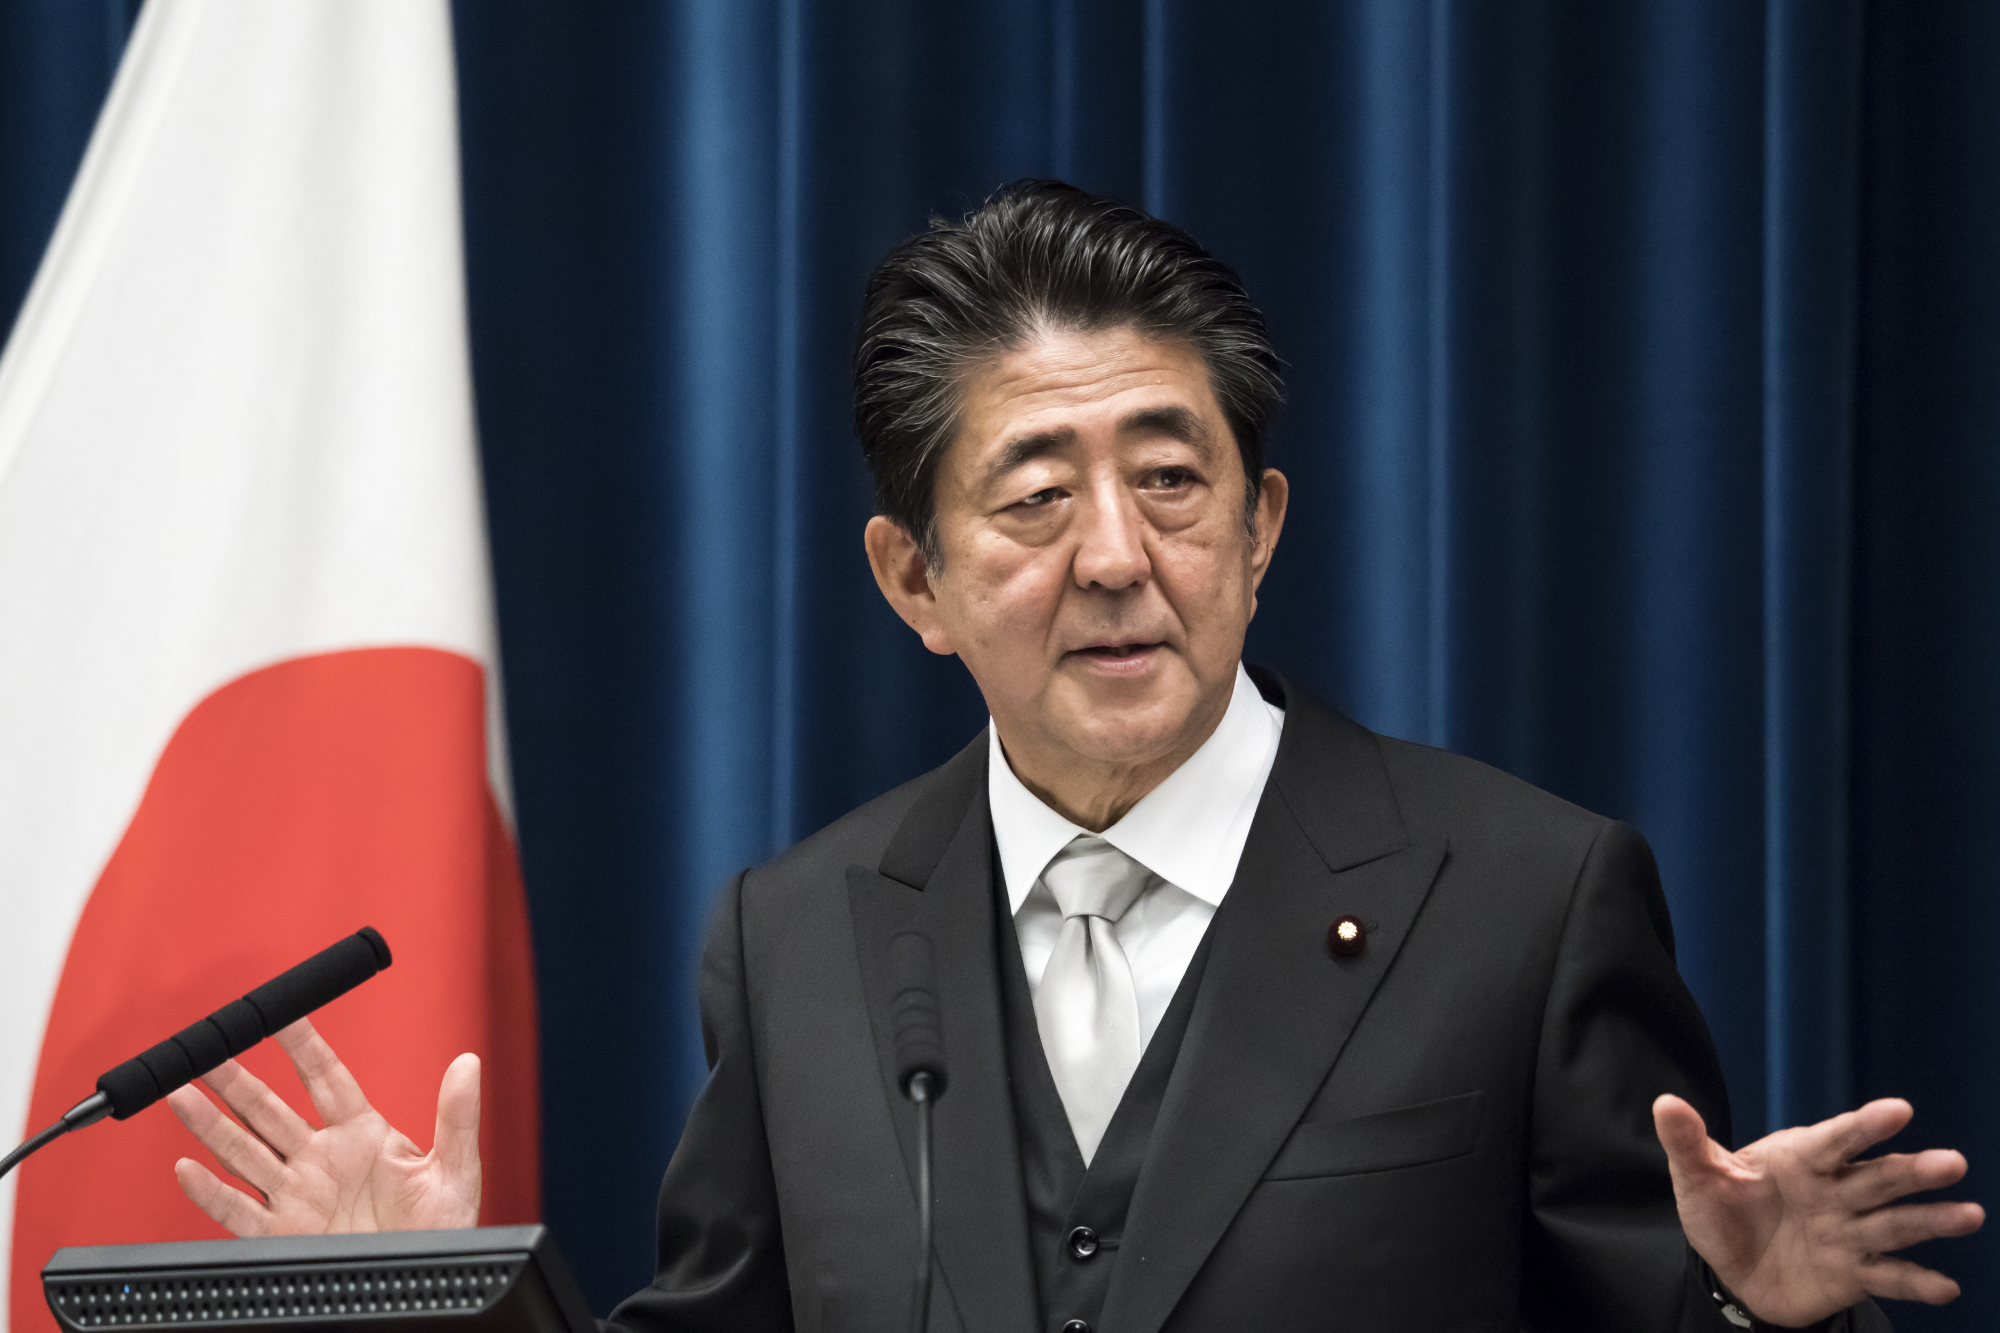 Prime Minister Shinzo Abe speaks during a news conference at his official residence in Tokyo on Wednesday after reshuffling his Cabinet. | BLOOMBERG